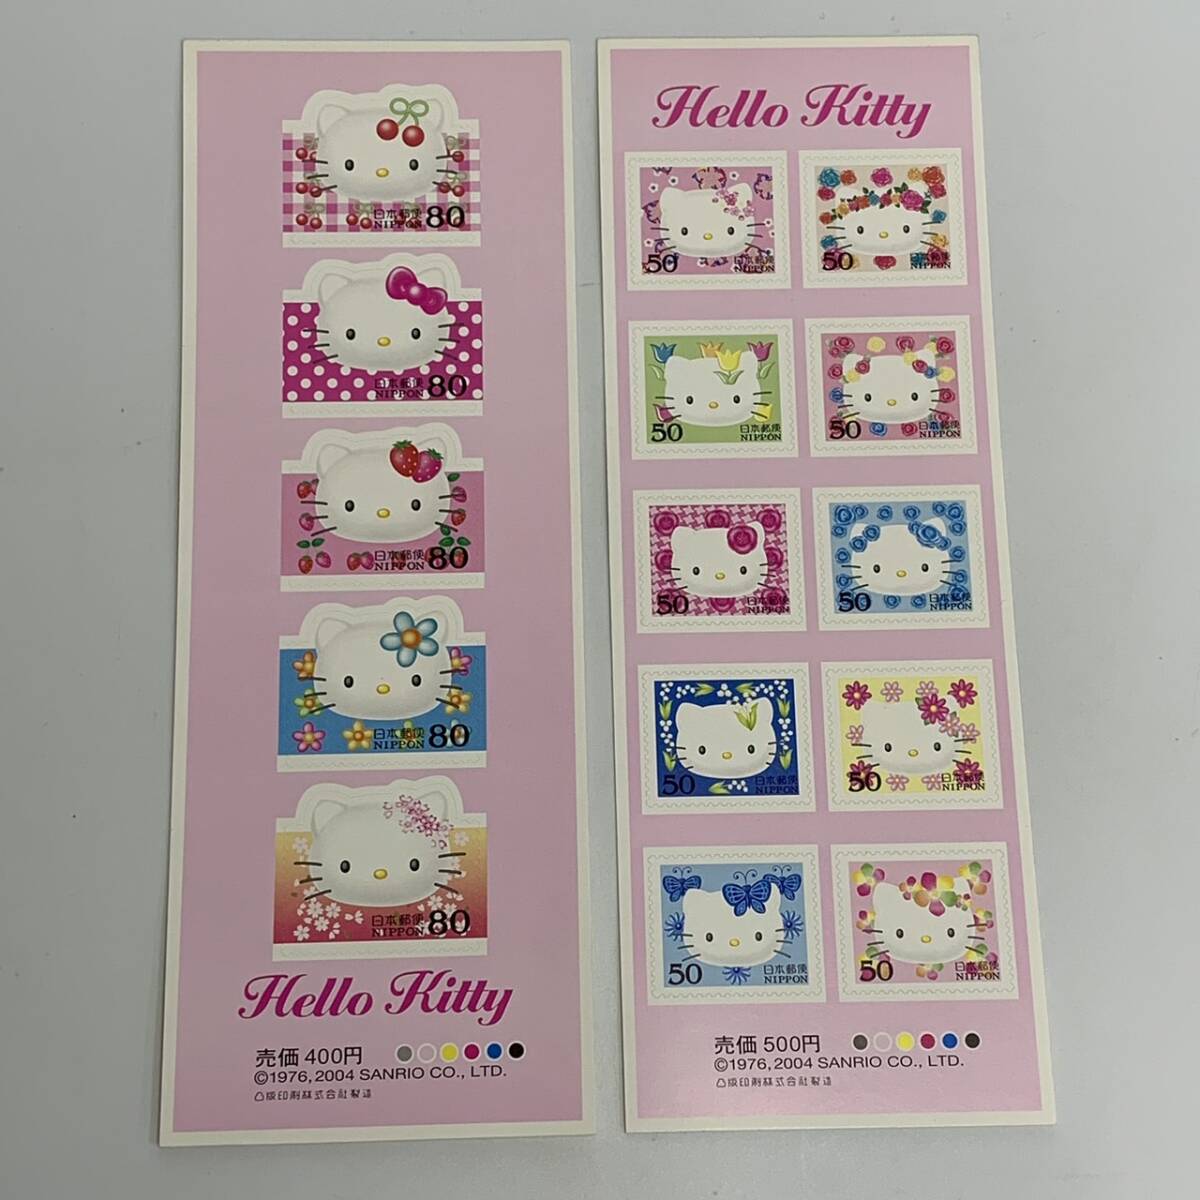 [ unused goods ] Hello Kitty stamp seat seal 80 jpy 5 sheets 50 jpy 10 sheets 900 jpy minute 